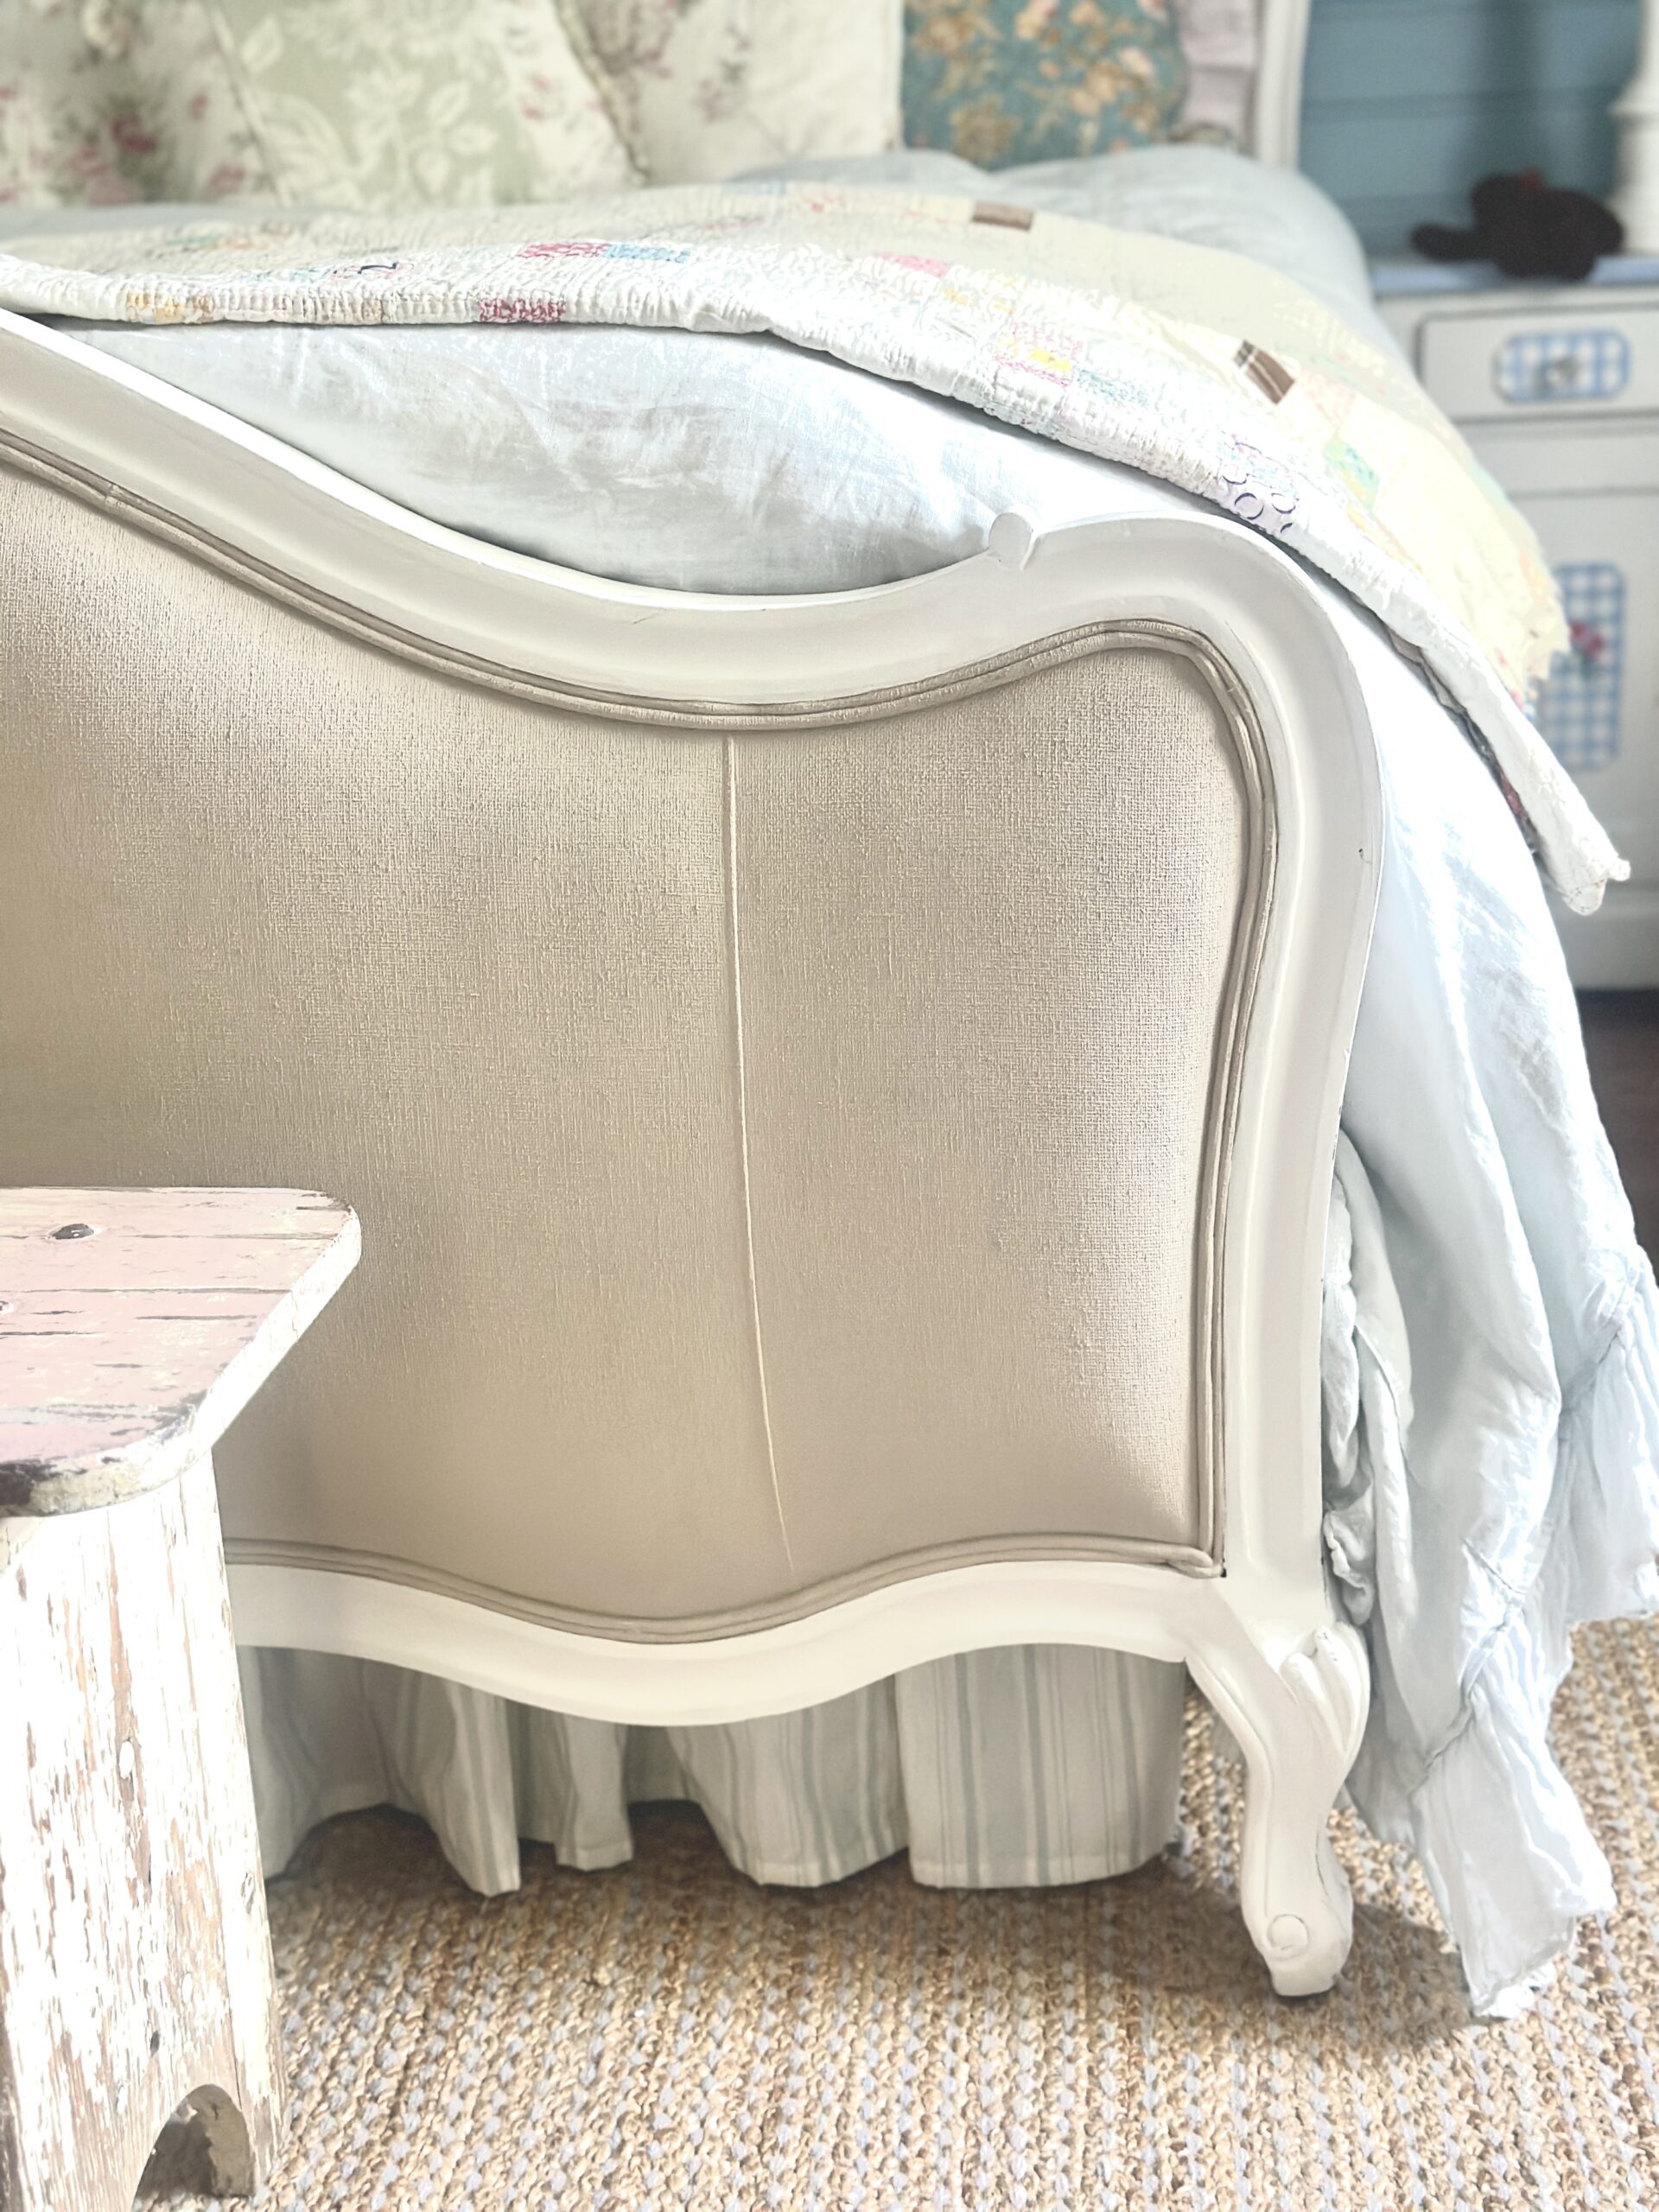 How to Paint Upholstery Fabric Using a Chalk Paint Type Product